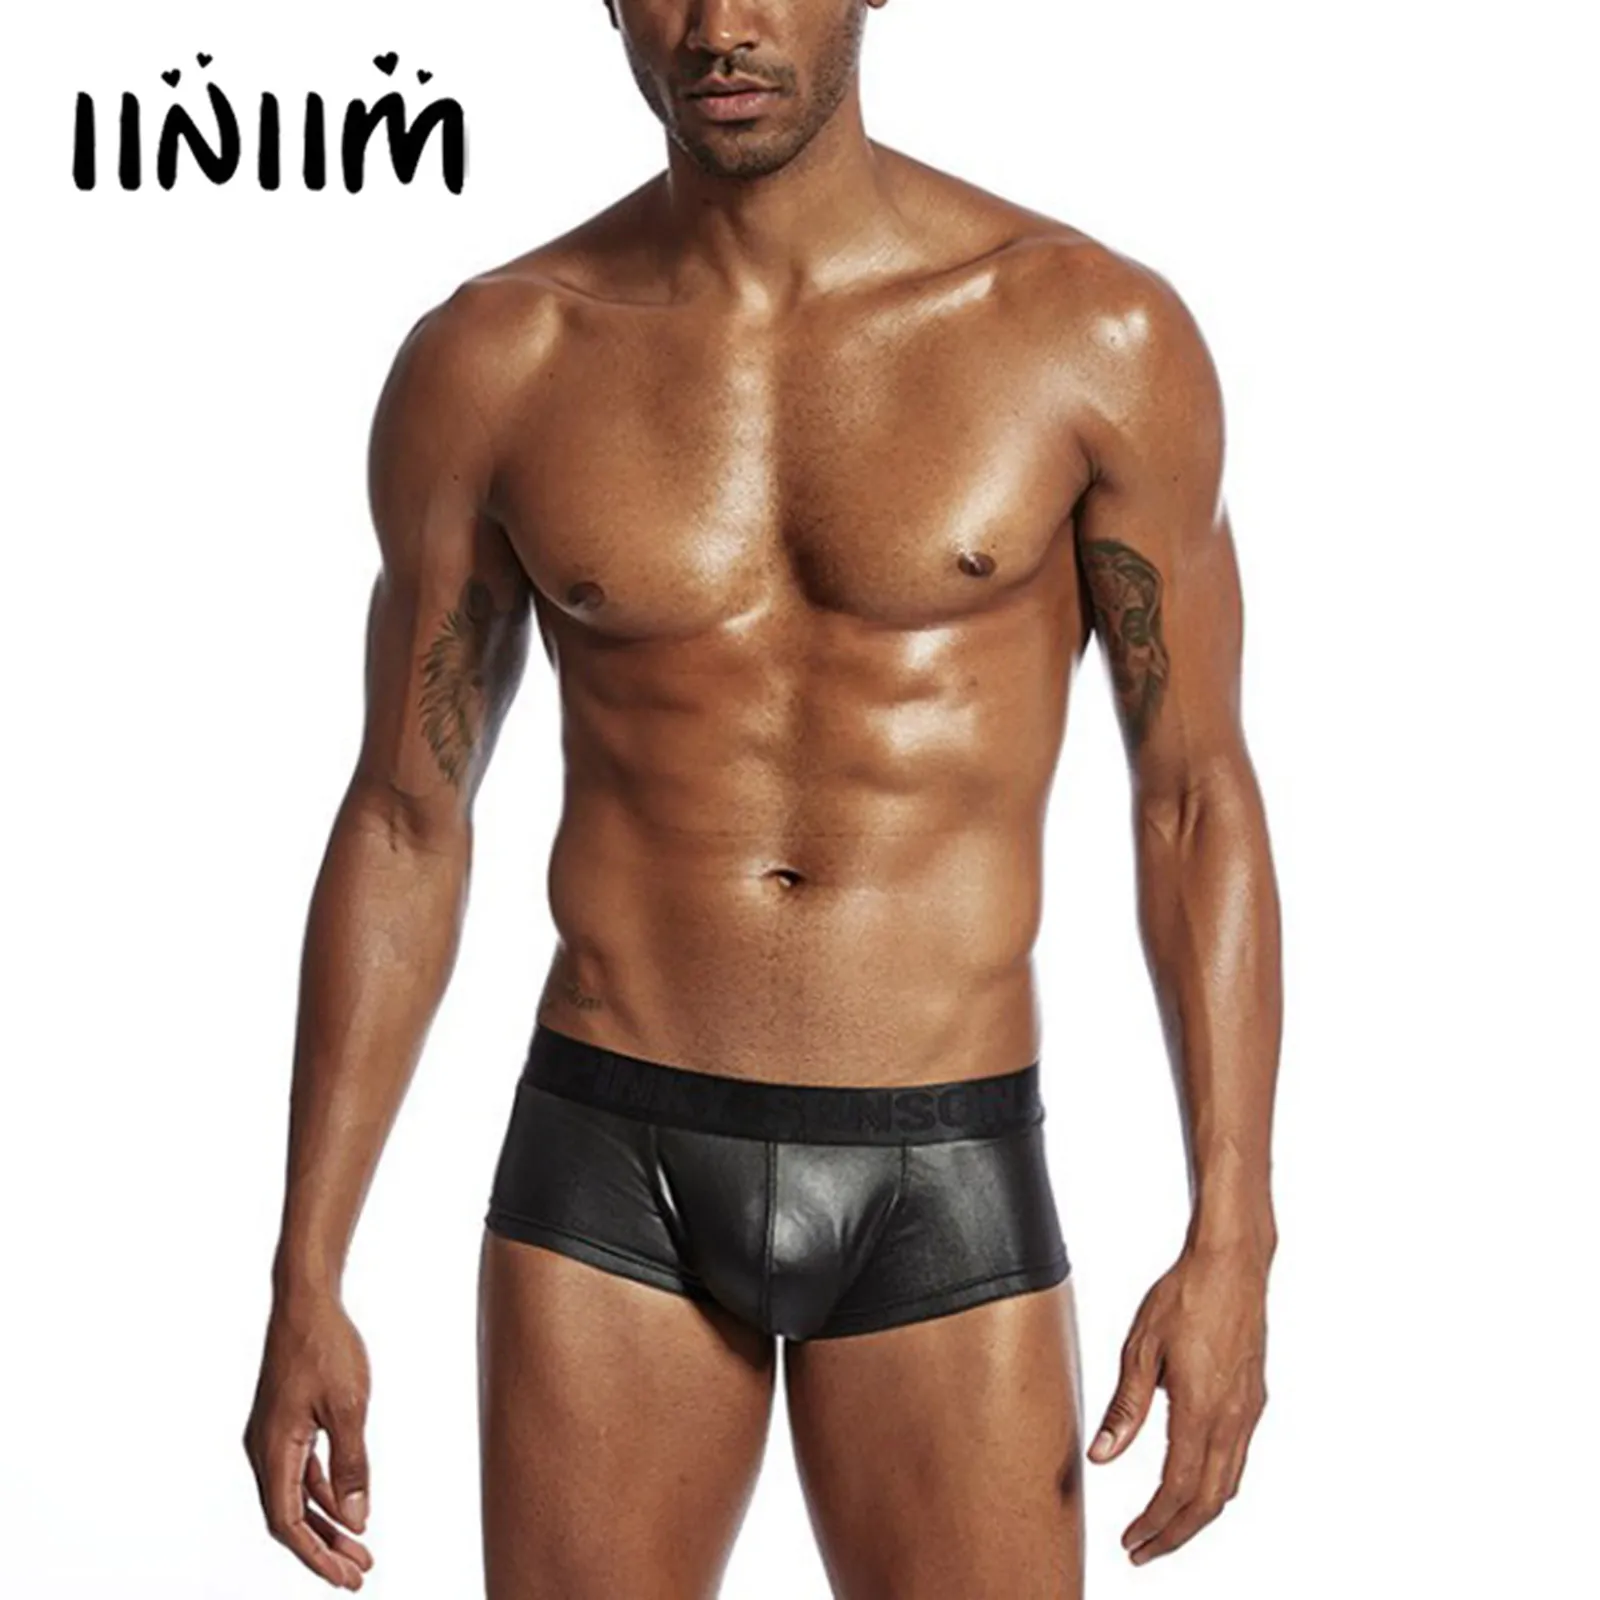 

Mens Glossy Patent Leather Bulge Pouch Boxer Briefs Shorts Low Rise Elastic Waistband Shorts Swimming Trunks Underwear